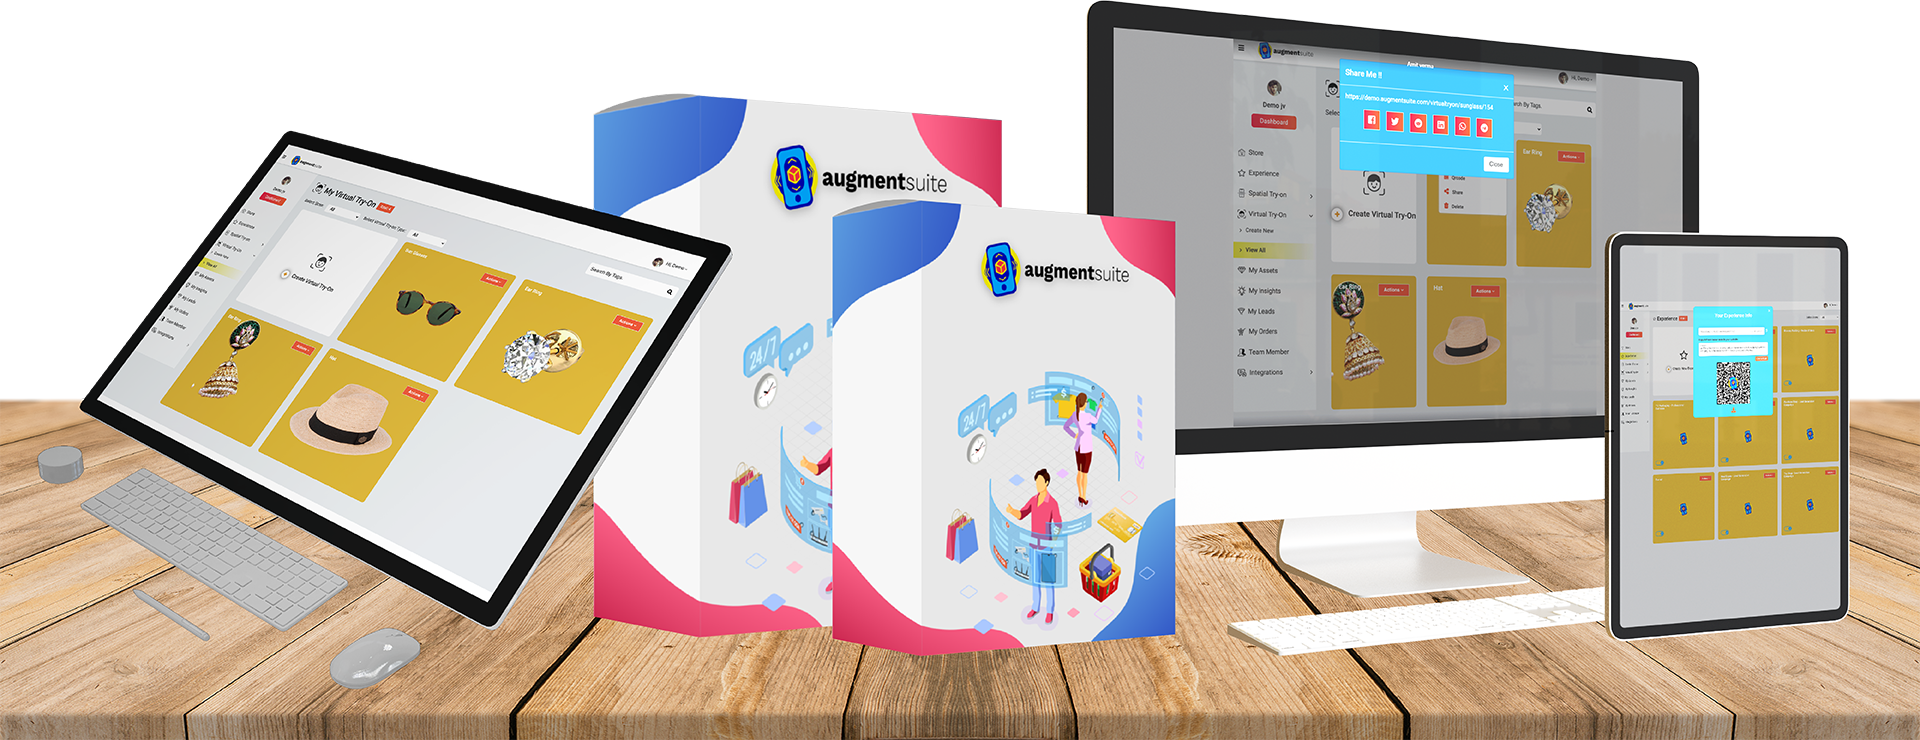 Augment Suite Review – New Software To Get Access To All That Is Needed To Run Augmented Reality Campaigns Successfully, You Can Create Virtual Try On Campaigns, Spatial Try On Campaigns, And Experience Campaign